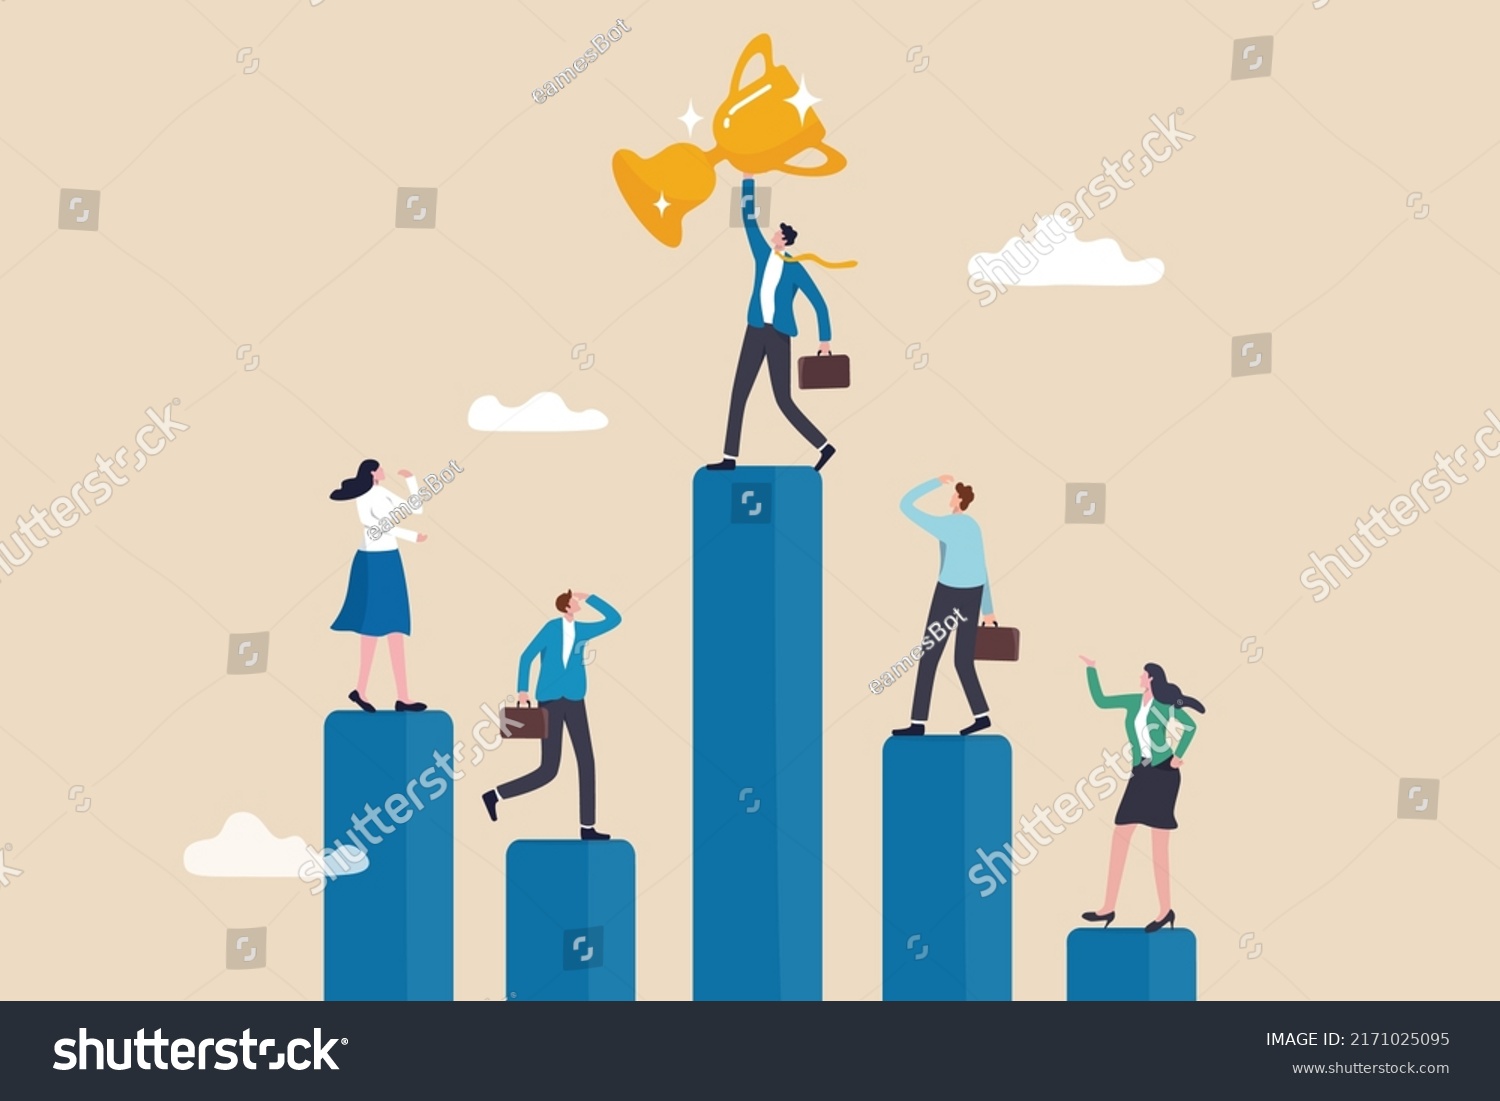 SVG of Business competition, performance comparison chart between company profit or employee, winner and loser in contest, achievement concept, business people compete on performance graph with one winner. svg